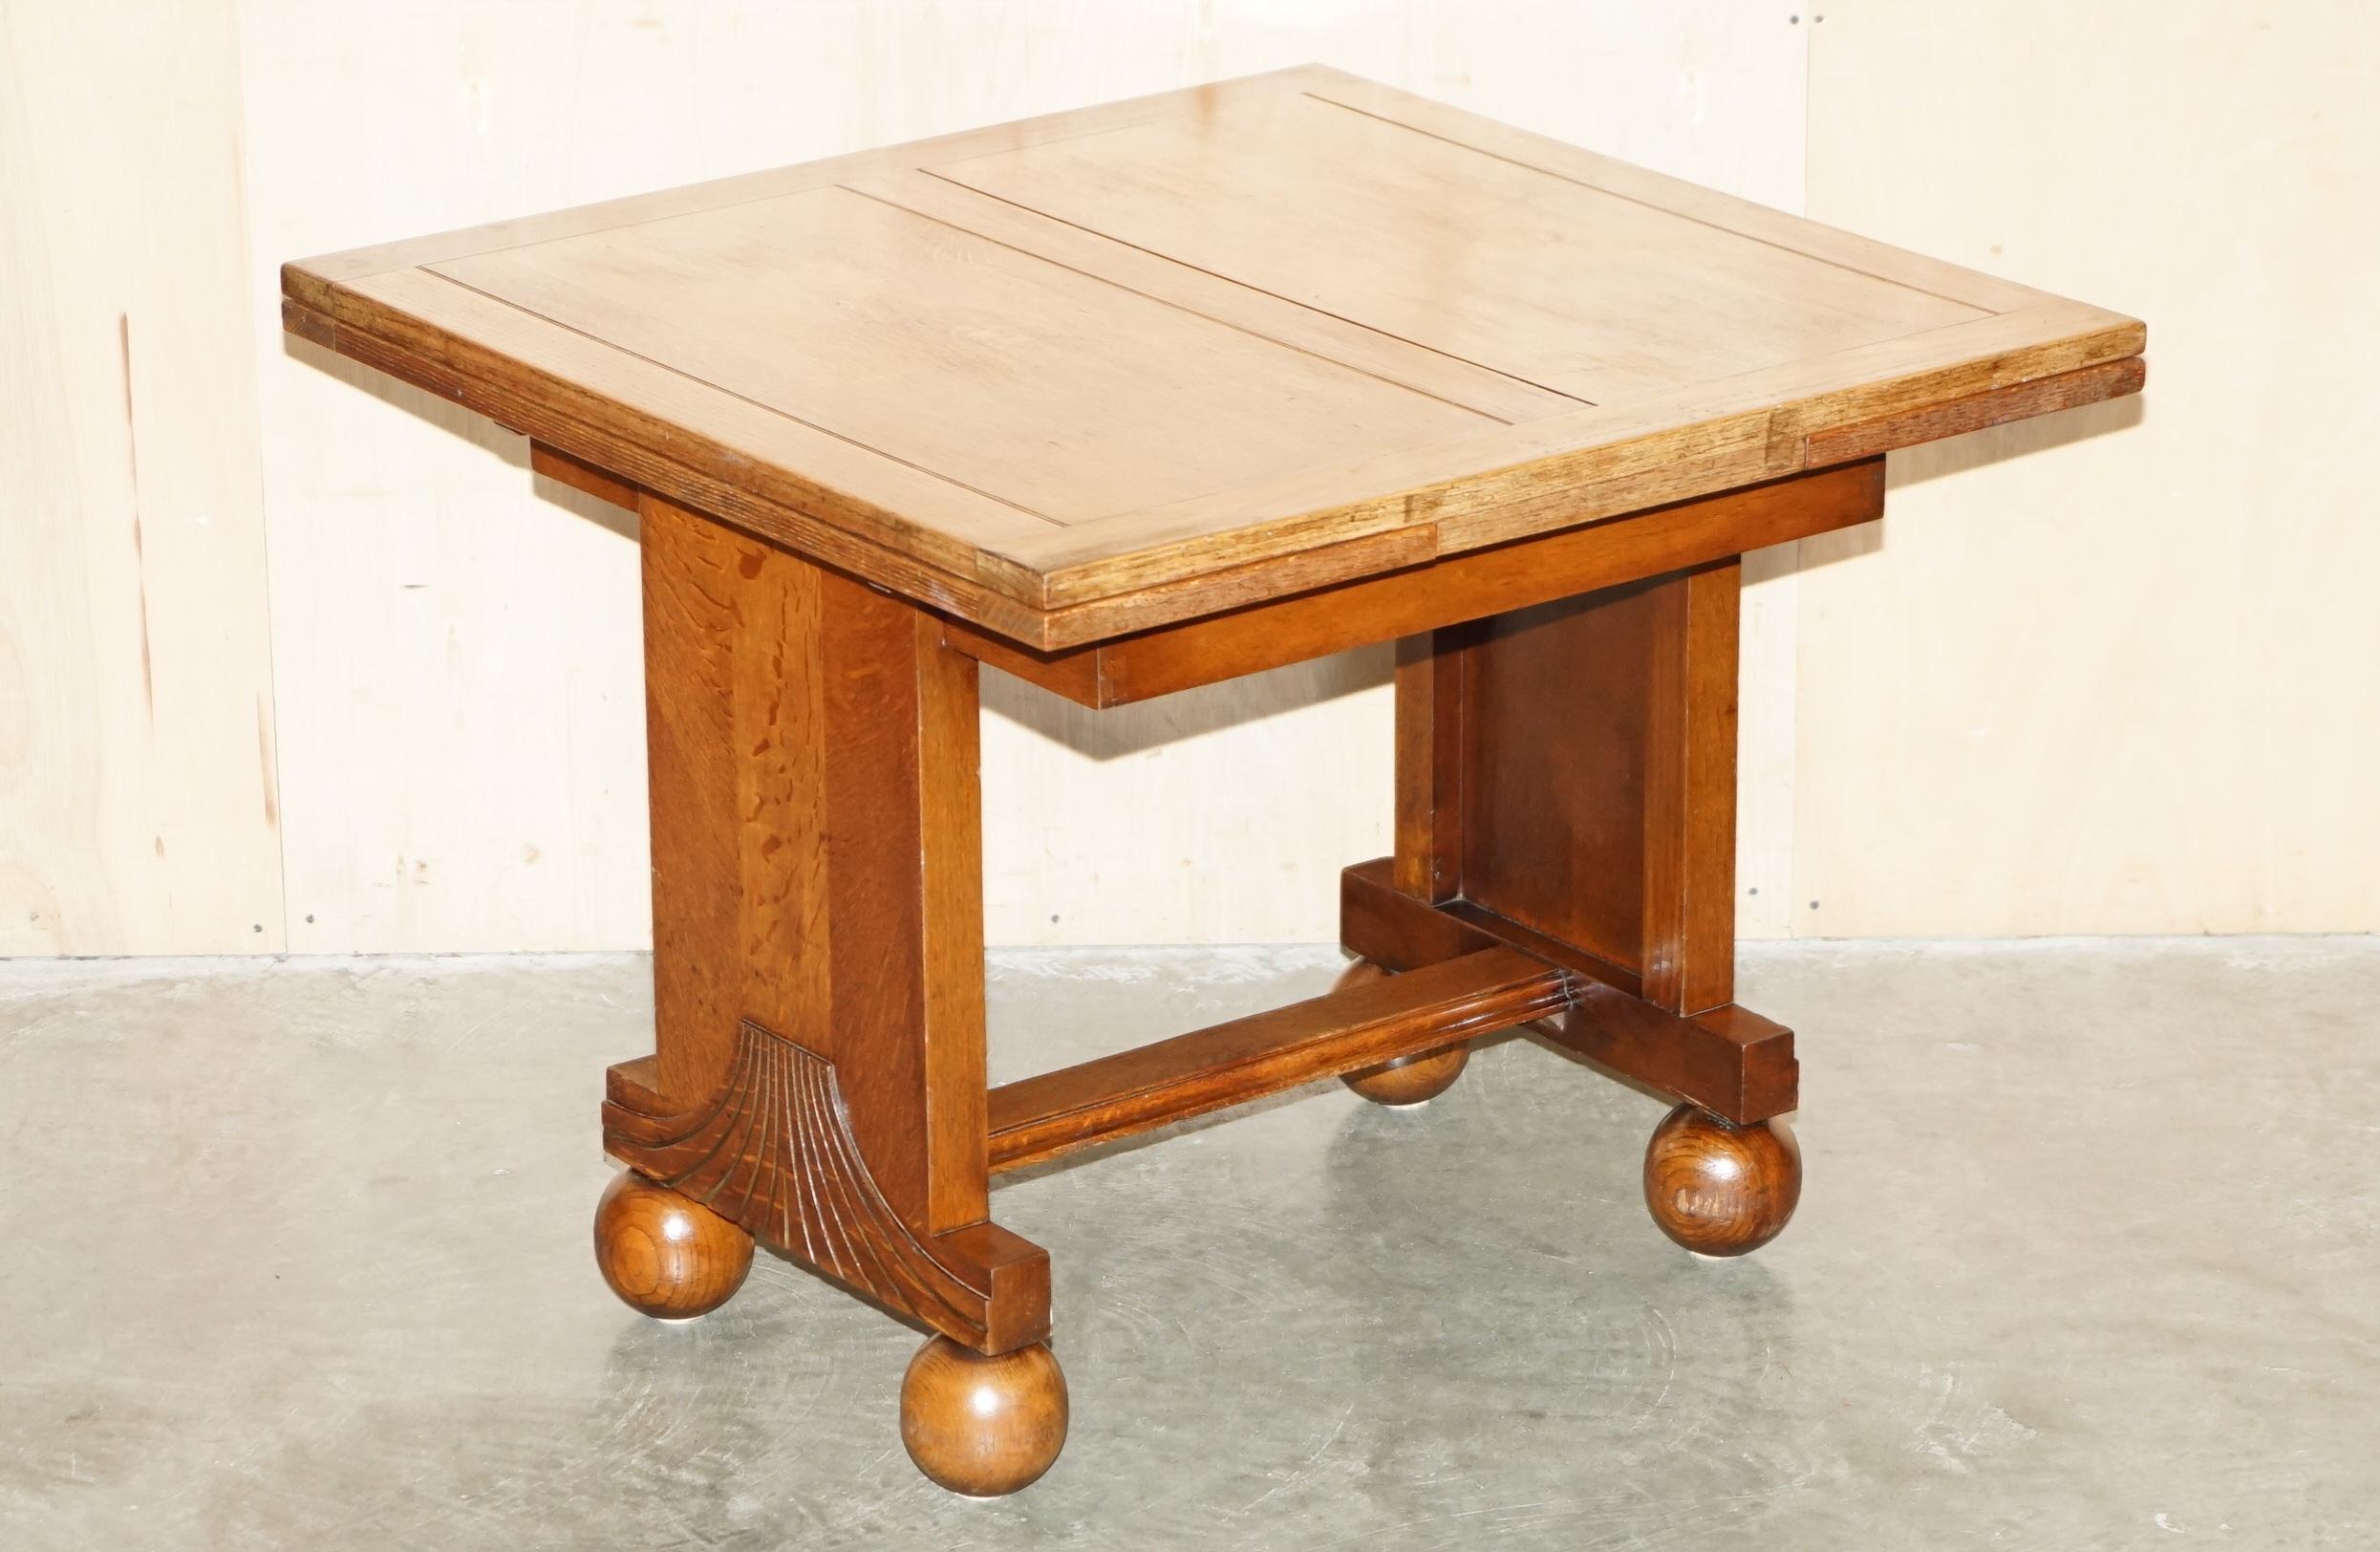 Royal House Antiques

Royal House Antiques is delighted to offer for sale this lovely circa 1920’s Art Deco Liberty's London style extending oak dining table which is part of a suite 

Please note the delivery fee listed is just a guide, it covers